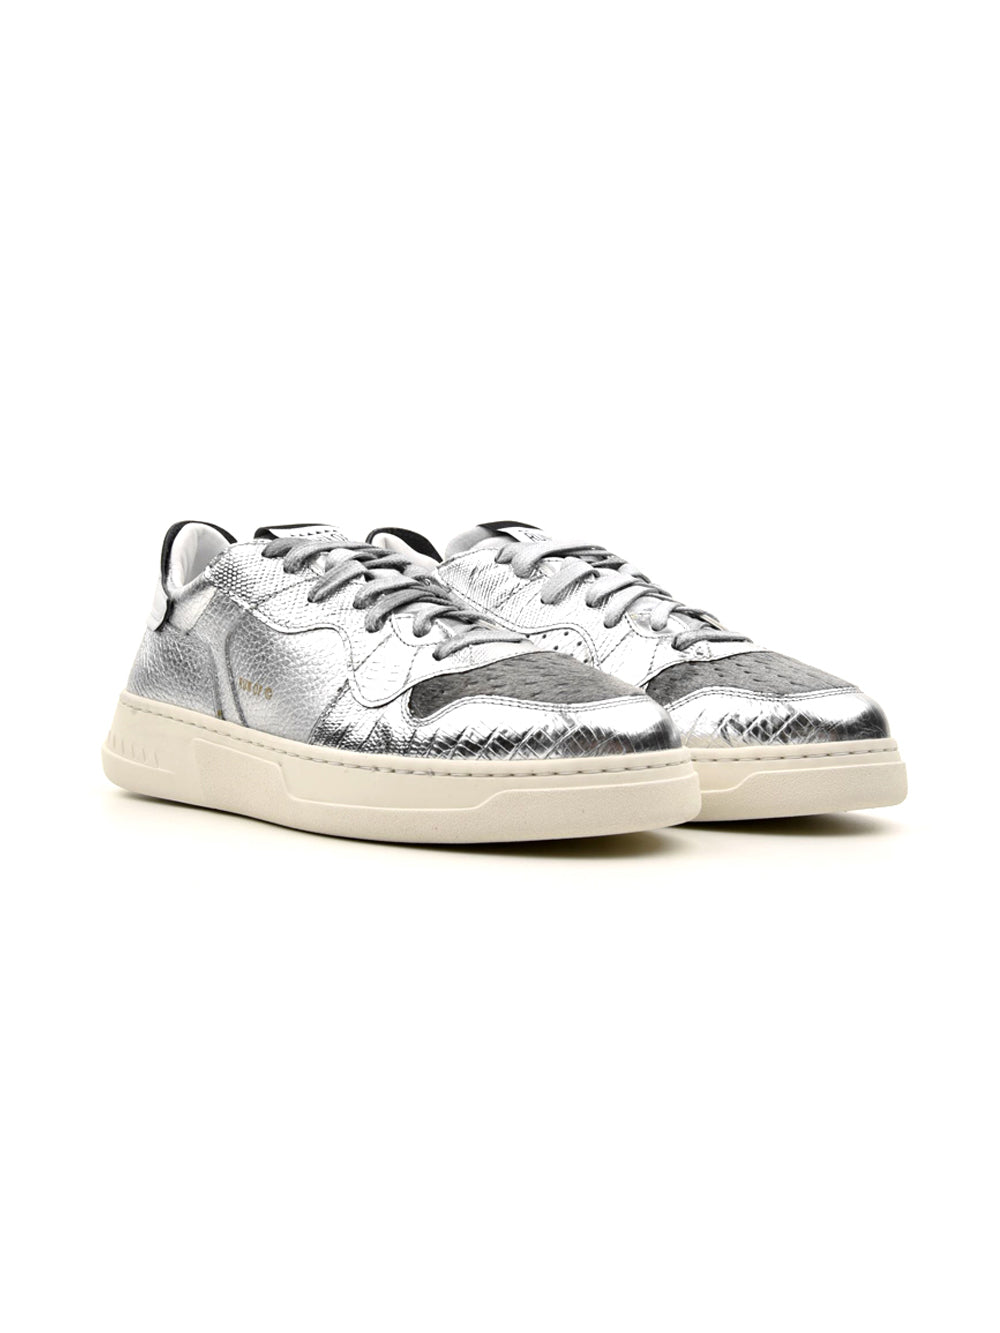 Sneakers Basse RUN OF Donna 70021 ROCKET Argento